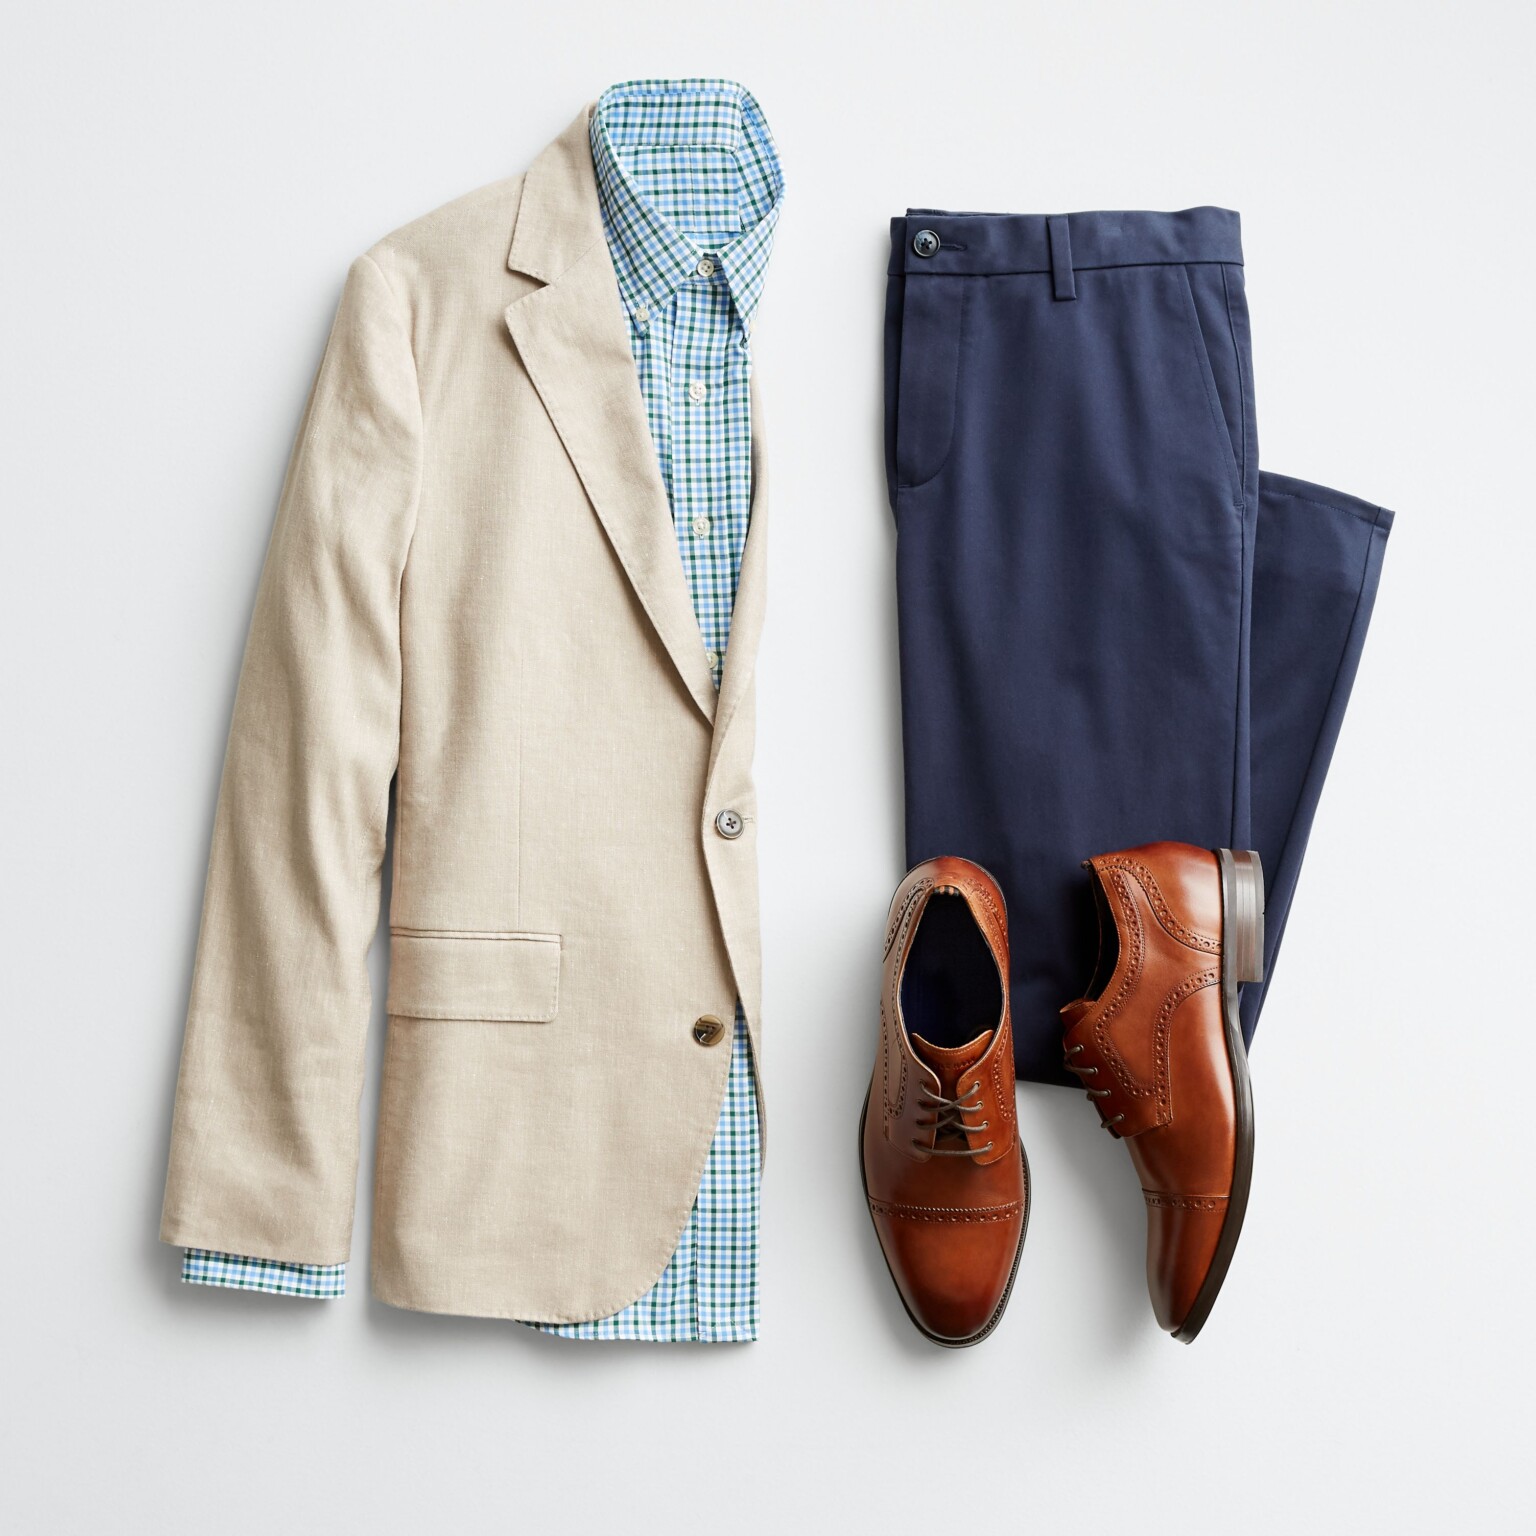 How To Tell If Your Blazer Fits | Stitch Fix Men